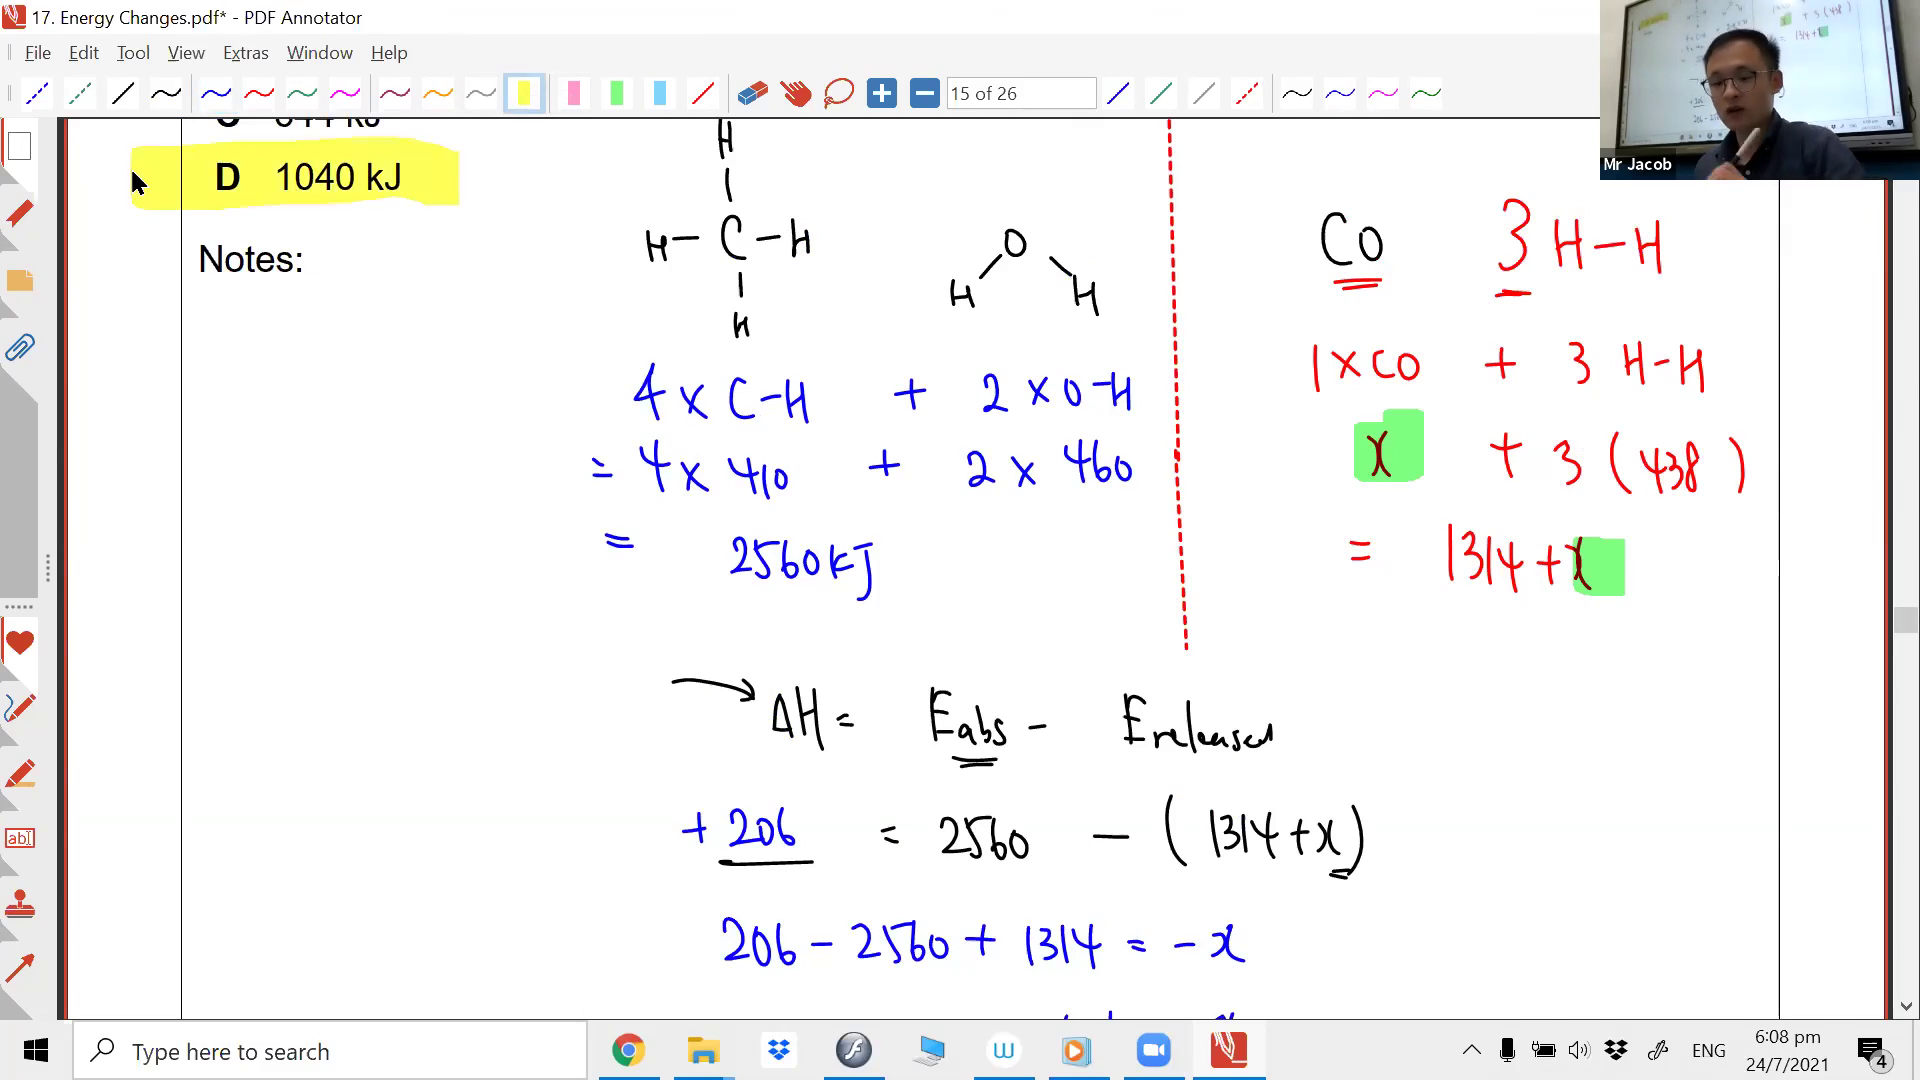 [ENERGY CHANGES] Enthalpy Change Calculation